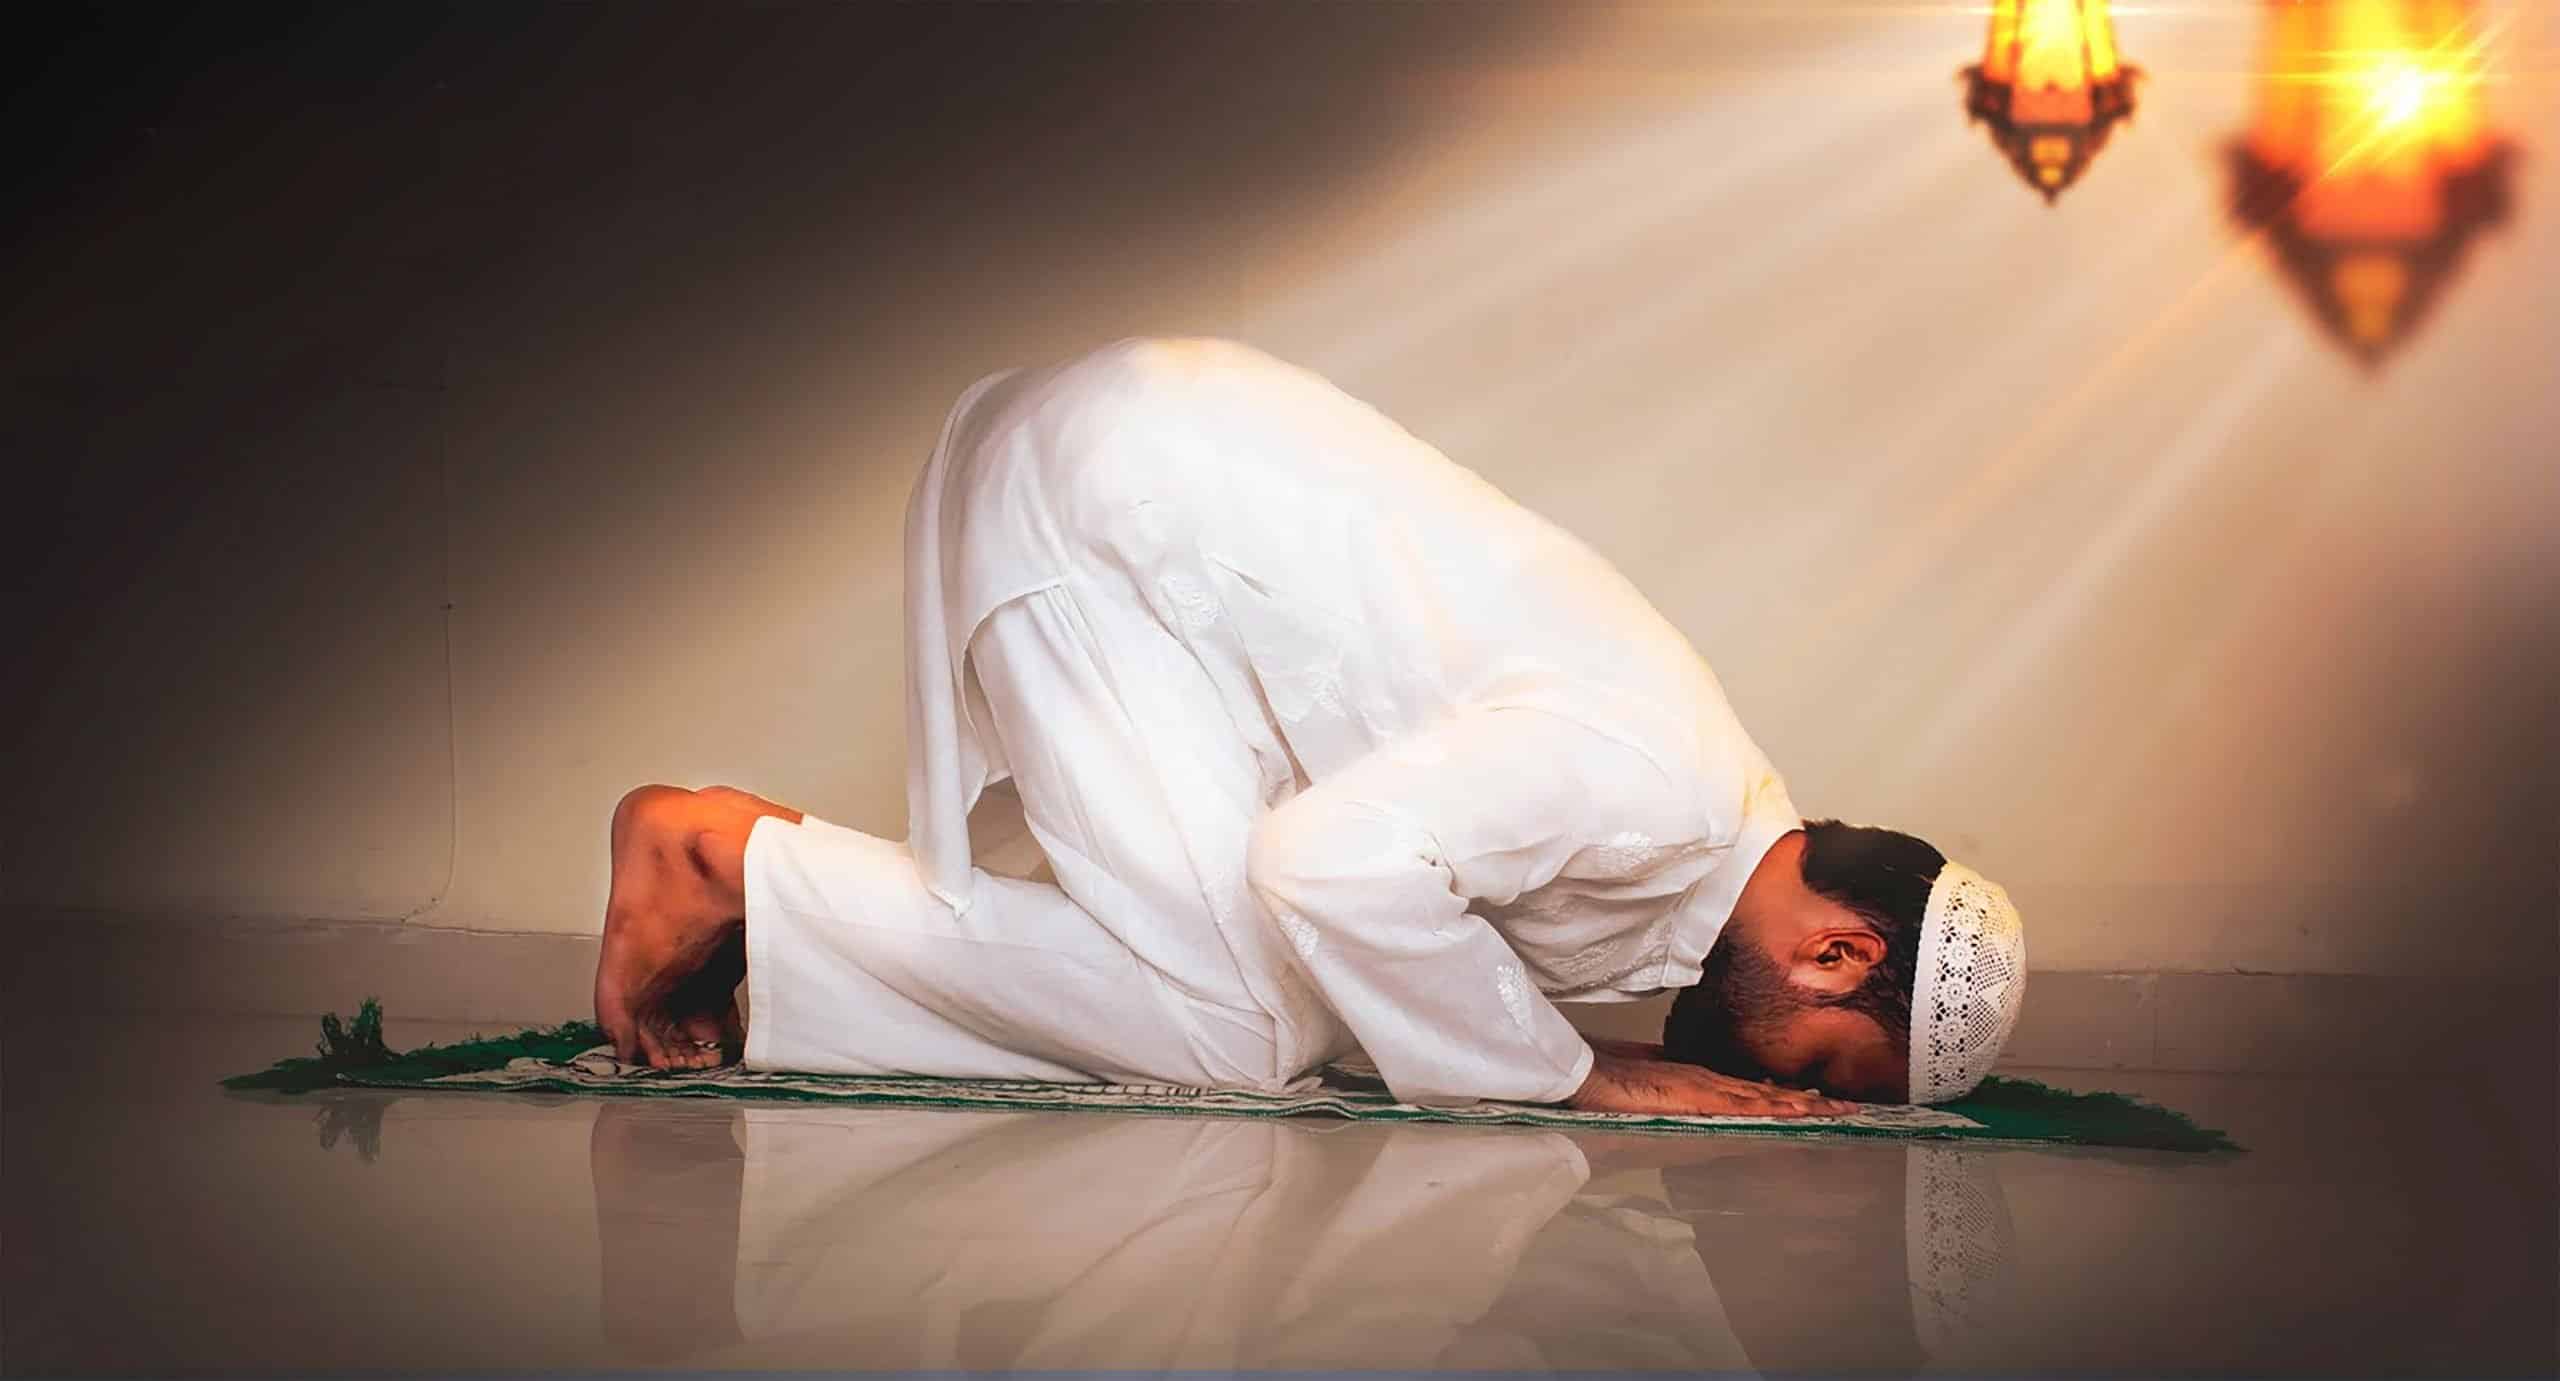 How to pray in Islam?